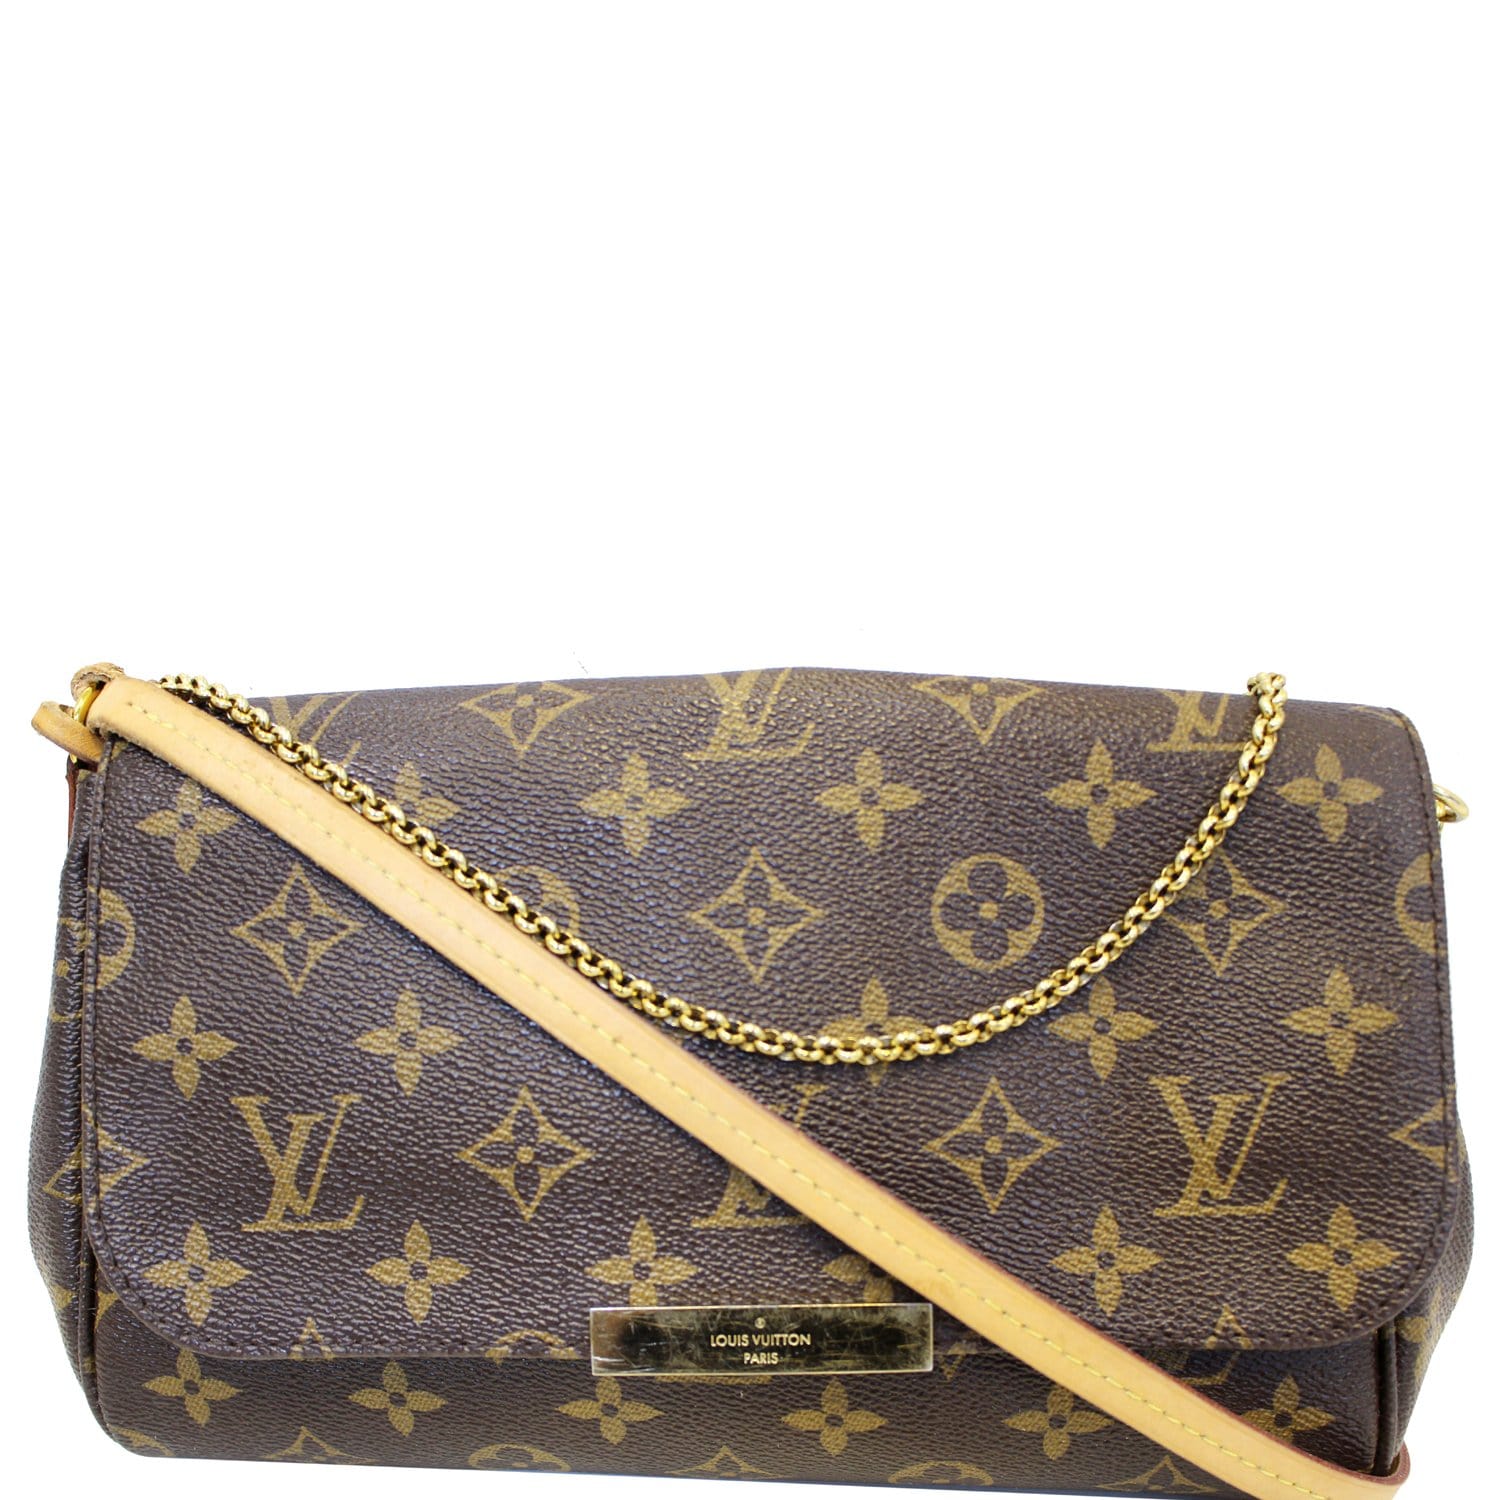 Reviewing my Louis Vuitton Graceful MM 💕 My latest bag in my collecti, Louis  Vuitton